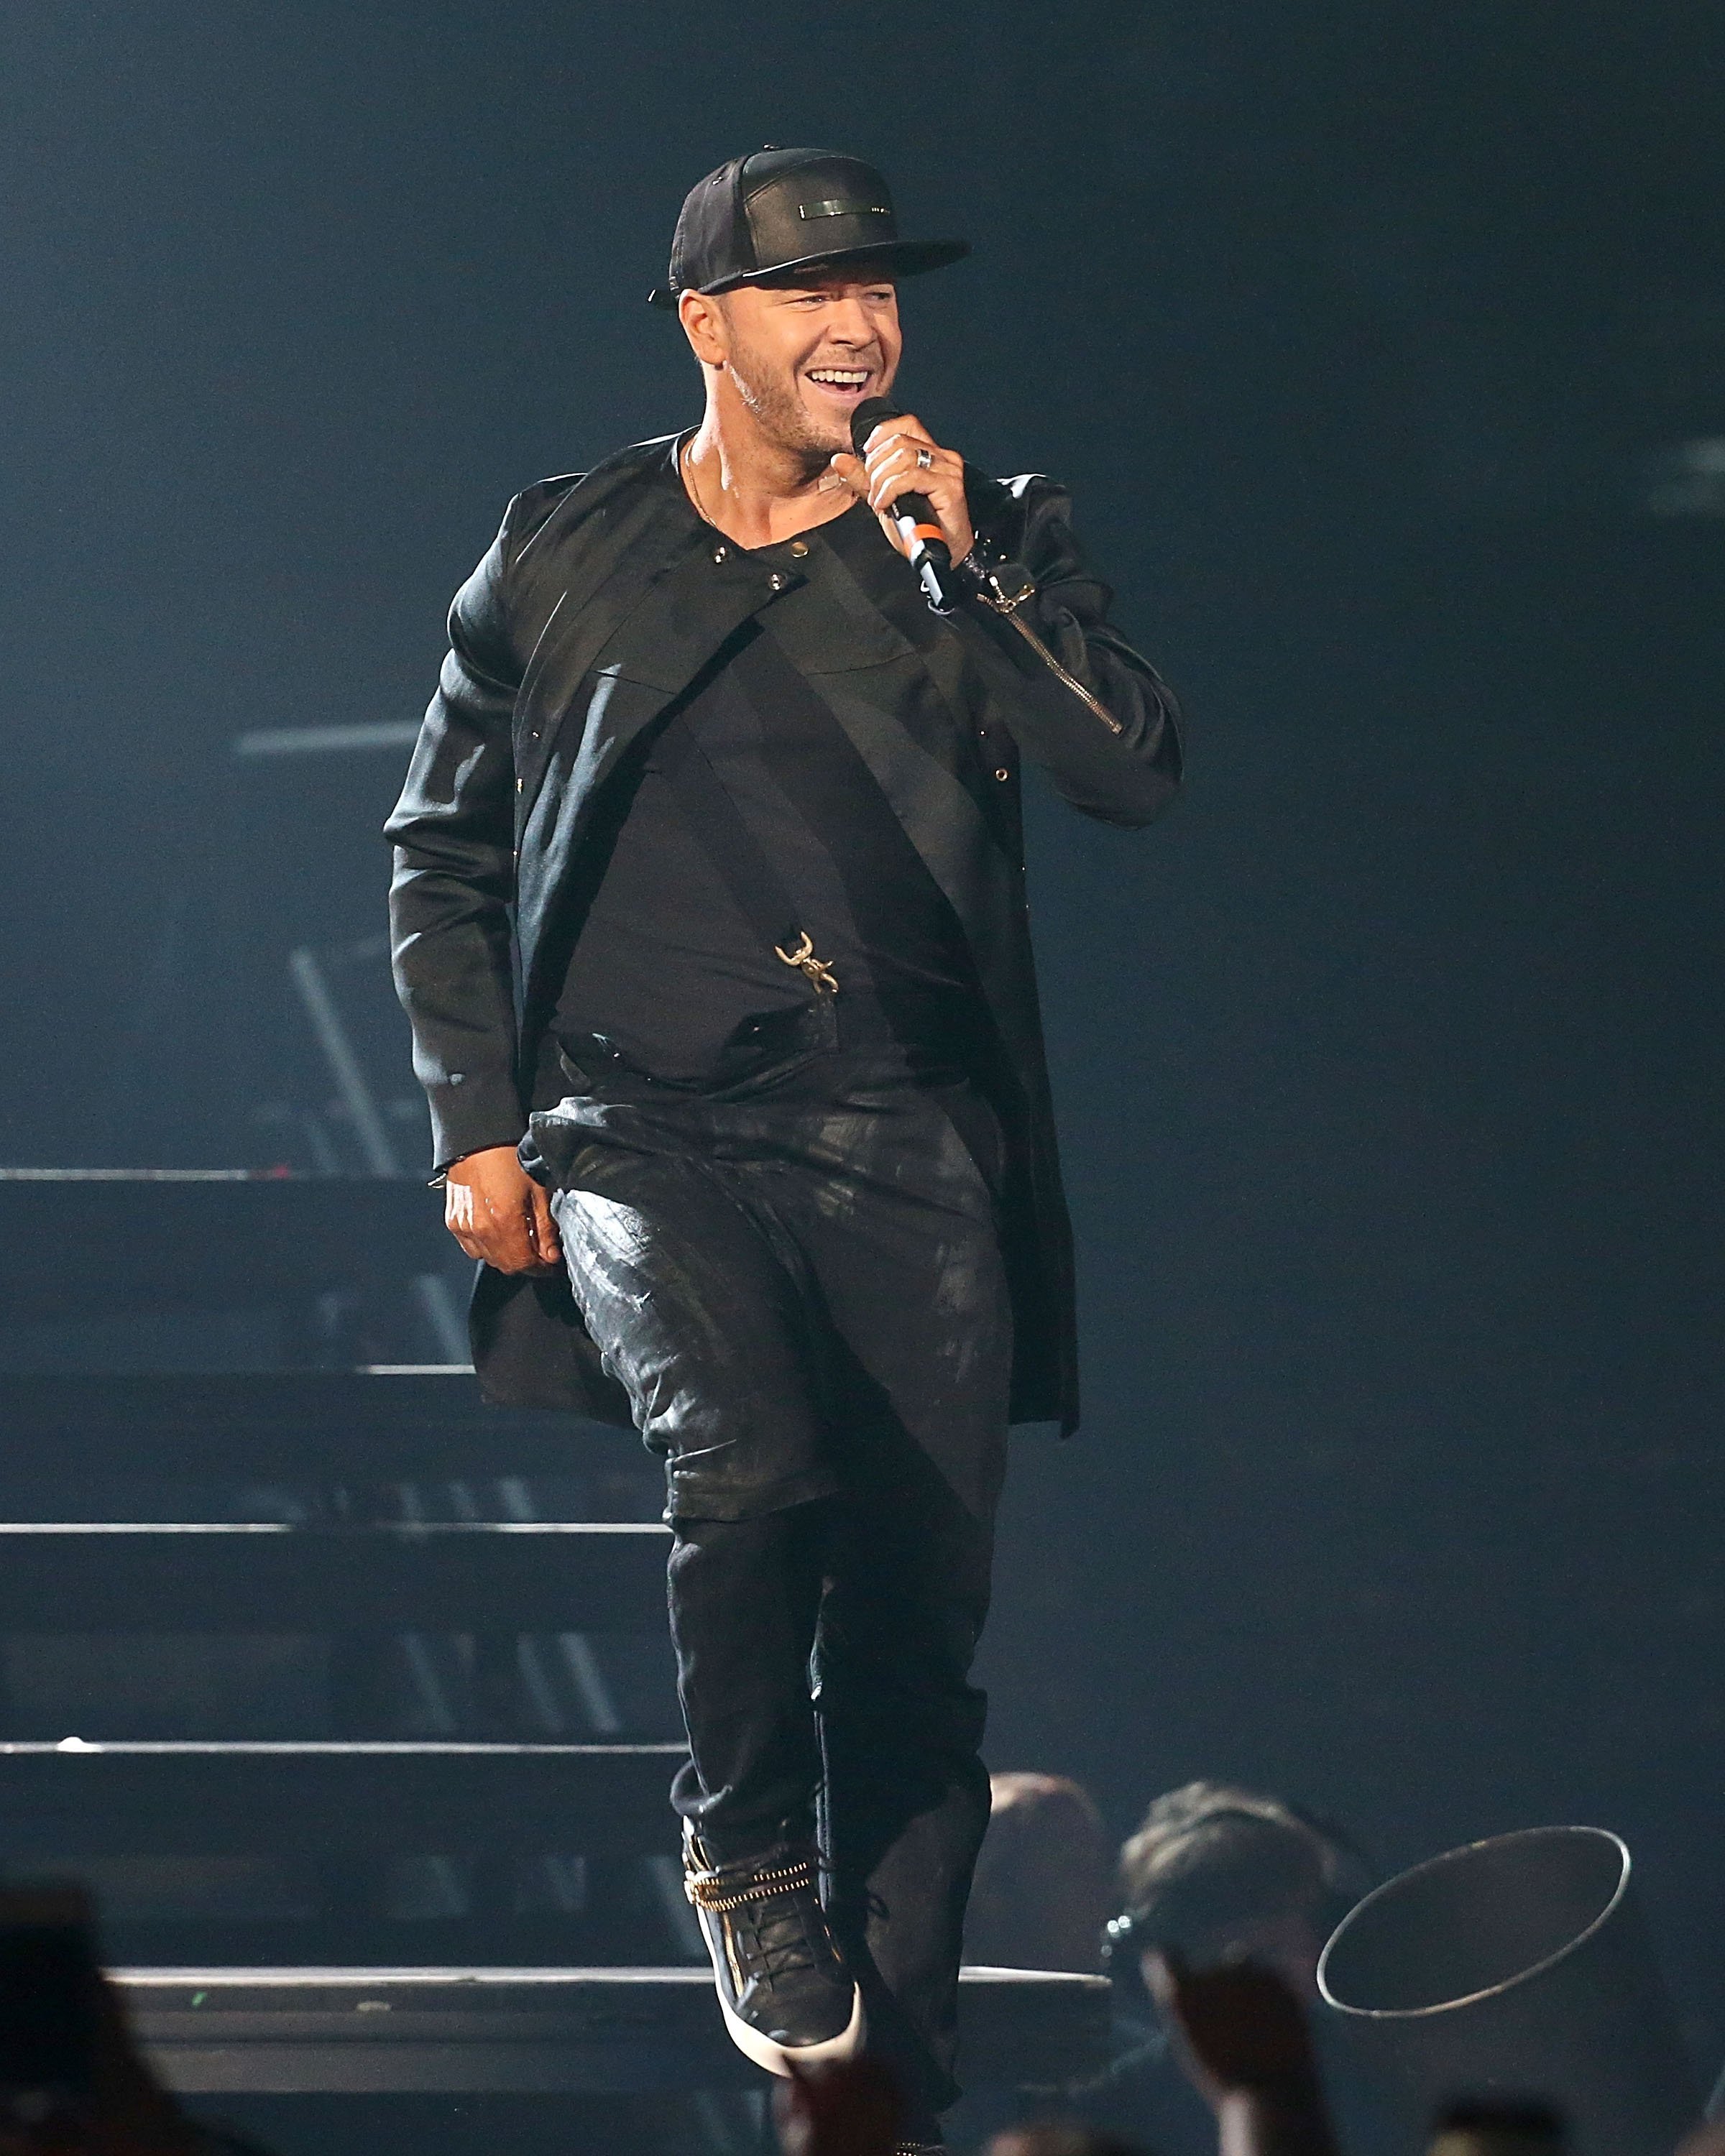 Donnie Wahlberg of New Kids on the Block performs in concert during the Total Package Tour at The Frank Erwin Center on May 21, 2017, in Austin, Texas. | Source: Getty Images.